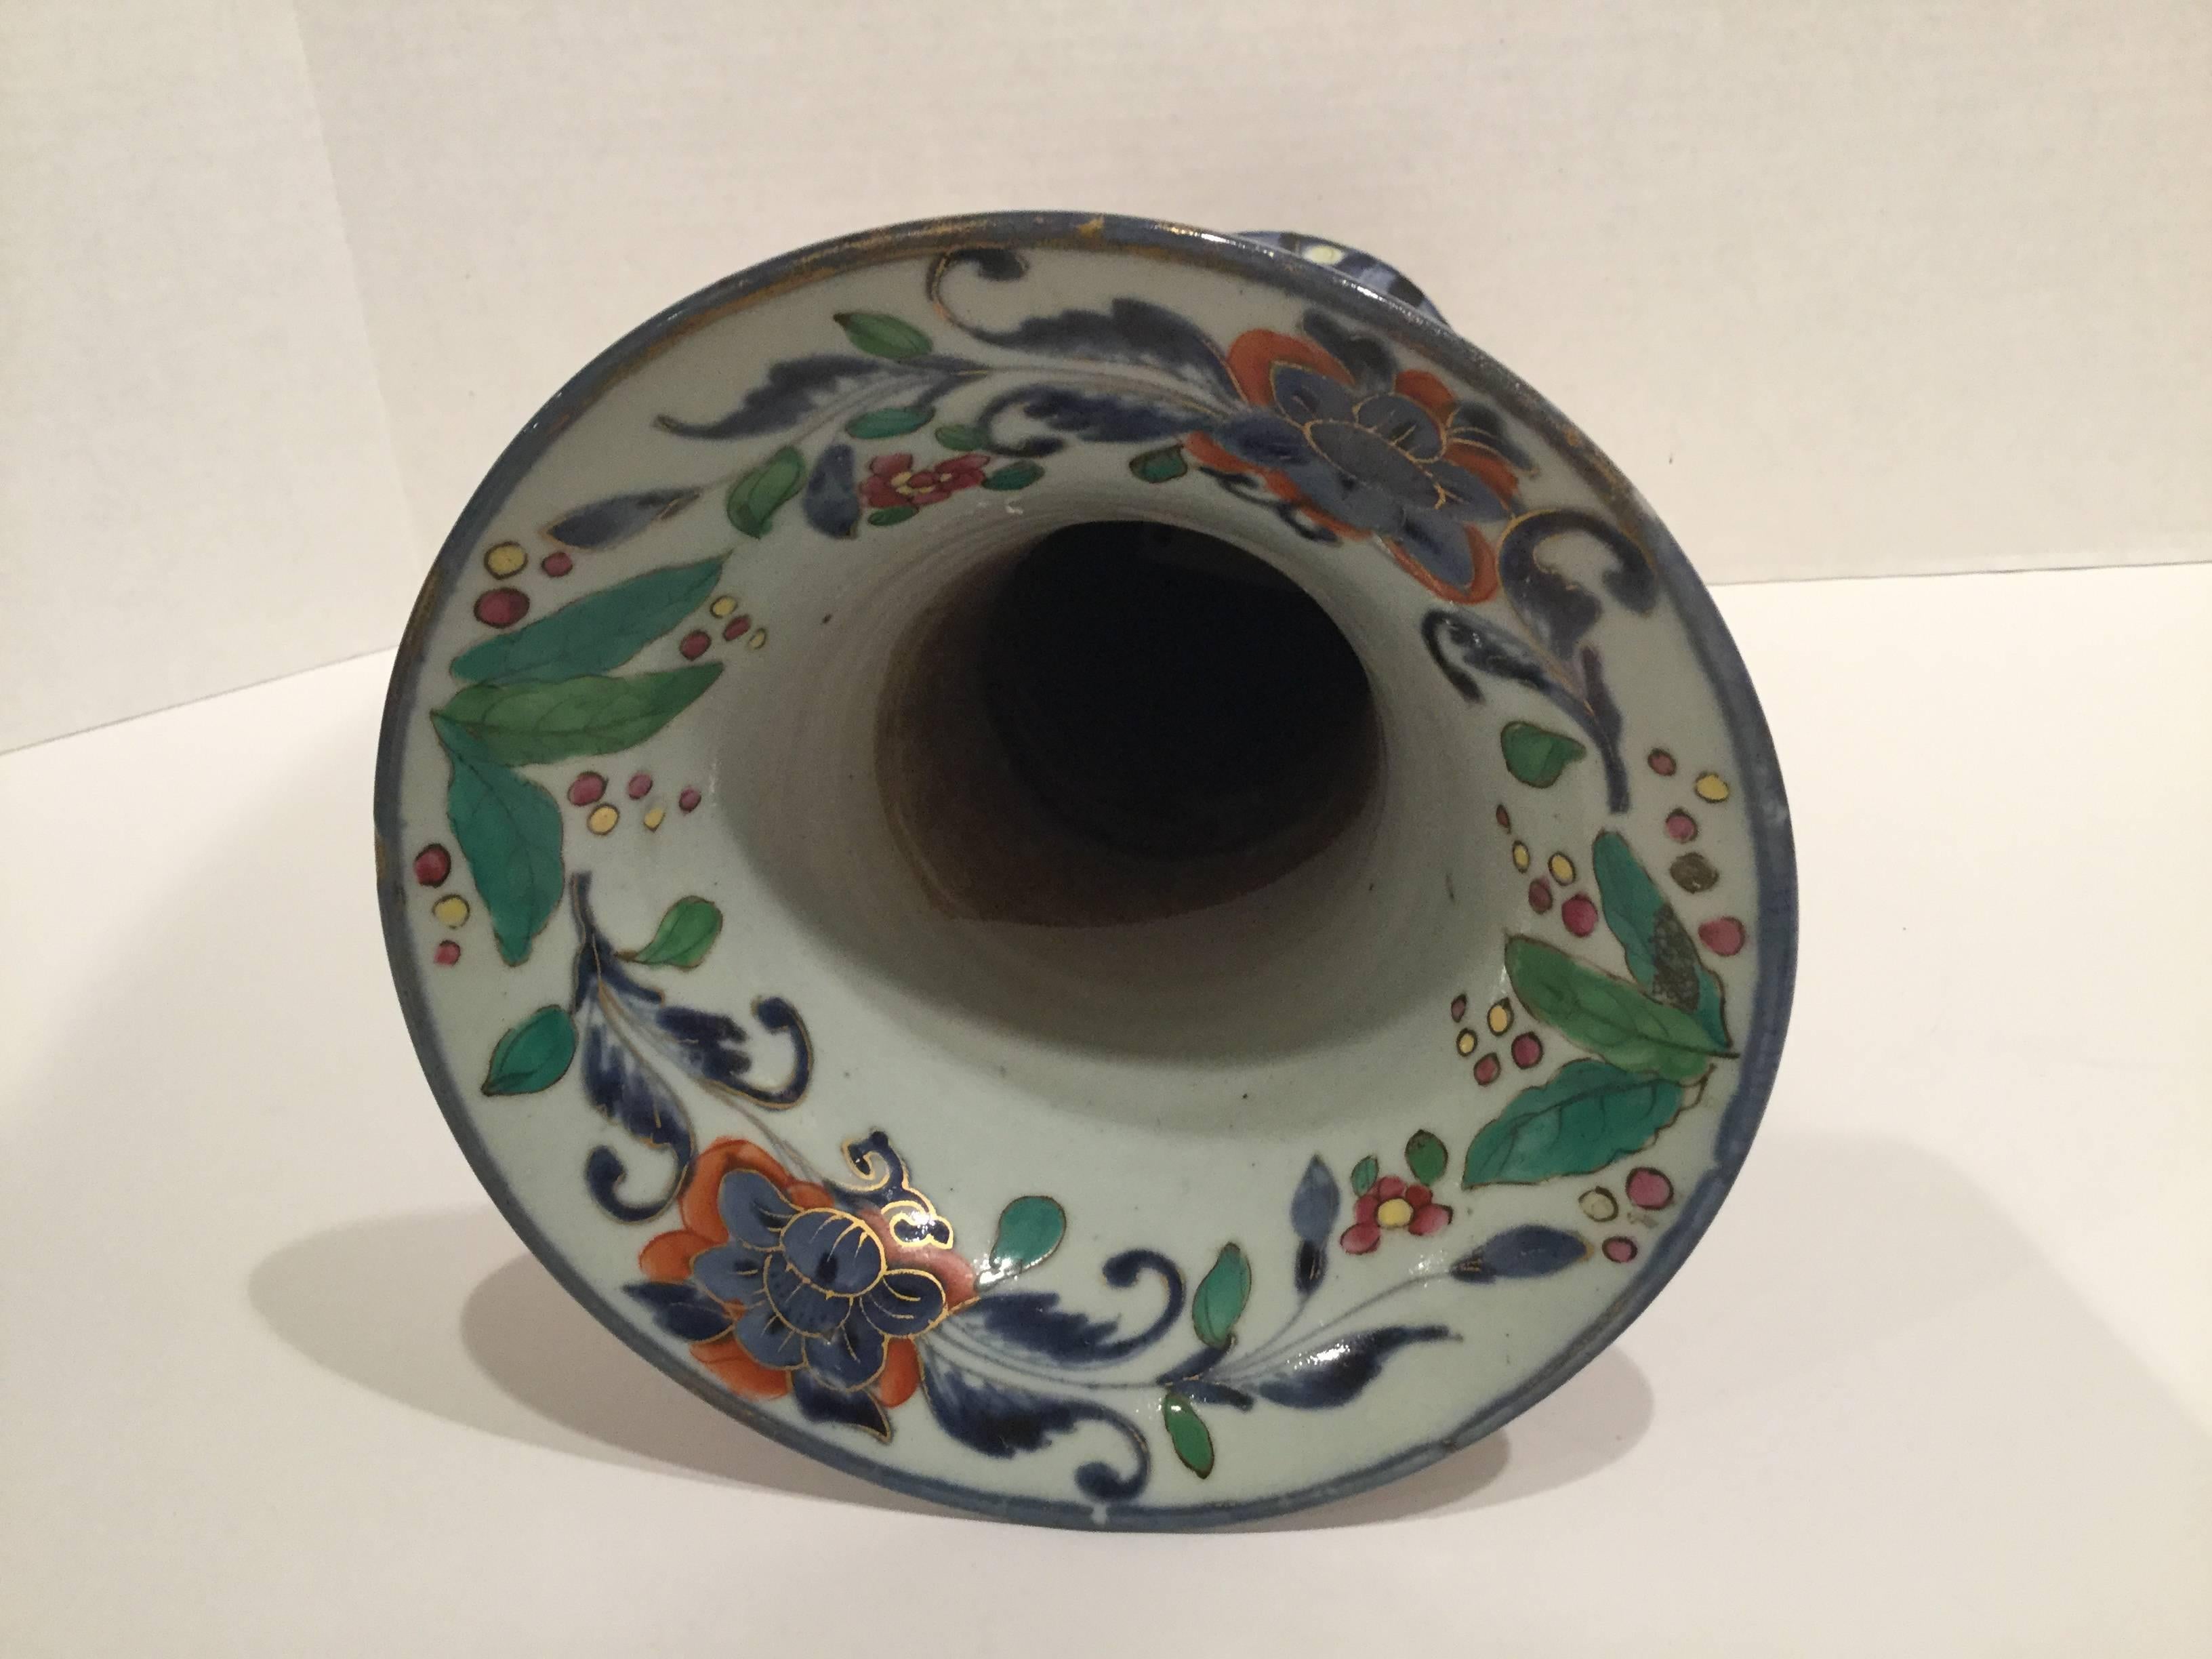 Clobbered Japanese Arita vase decorated with a floral design.